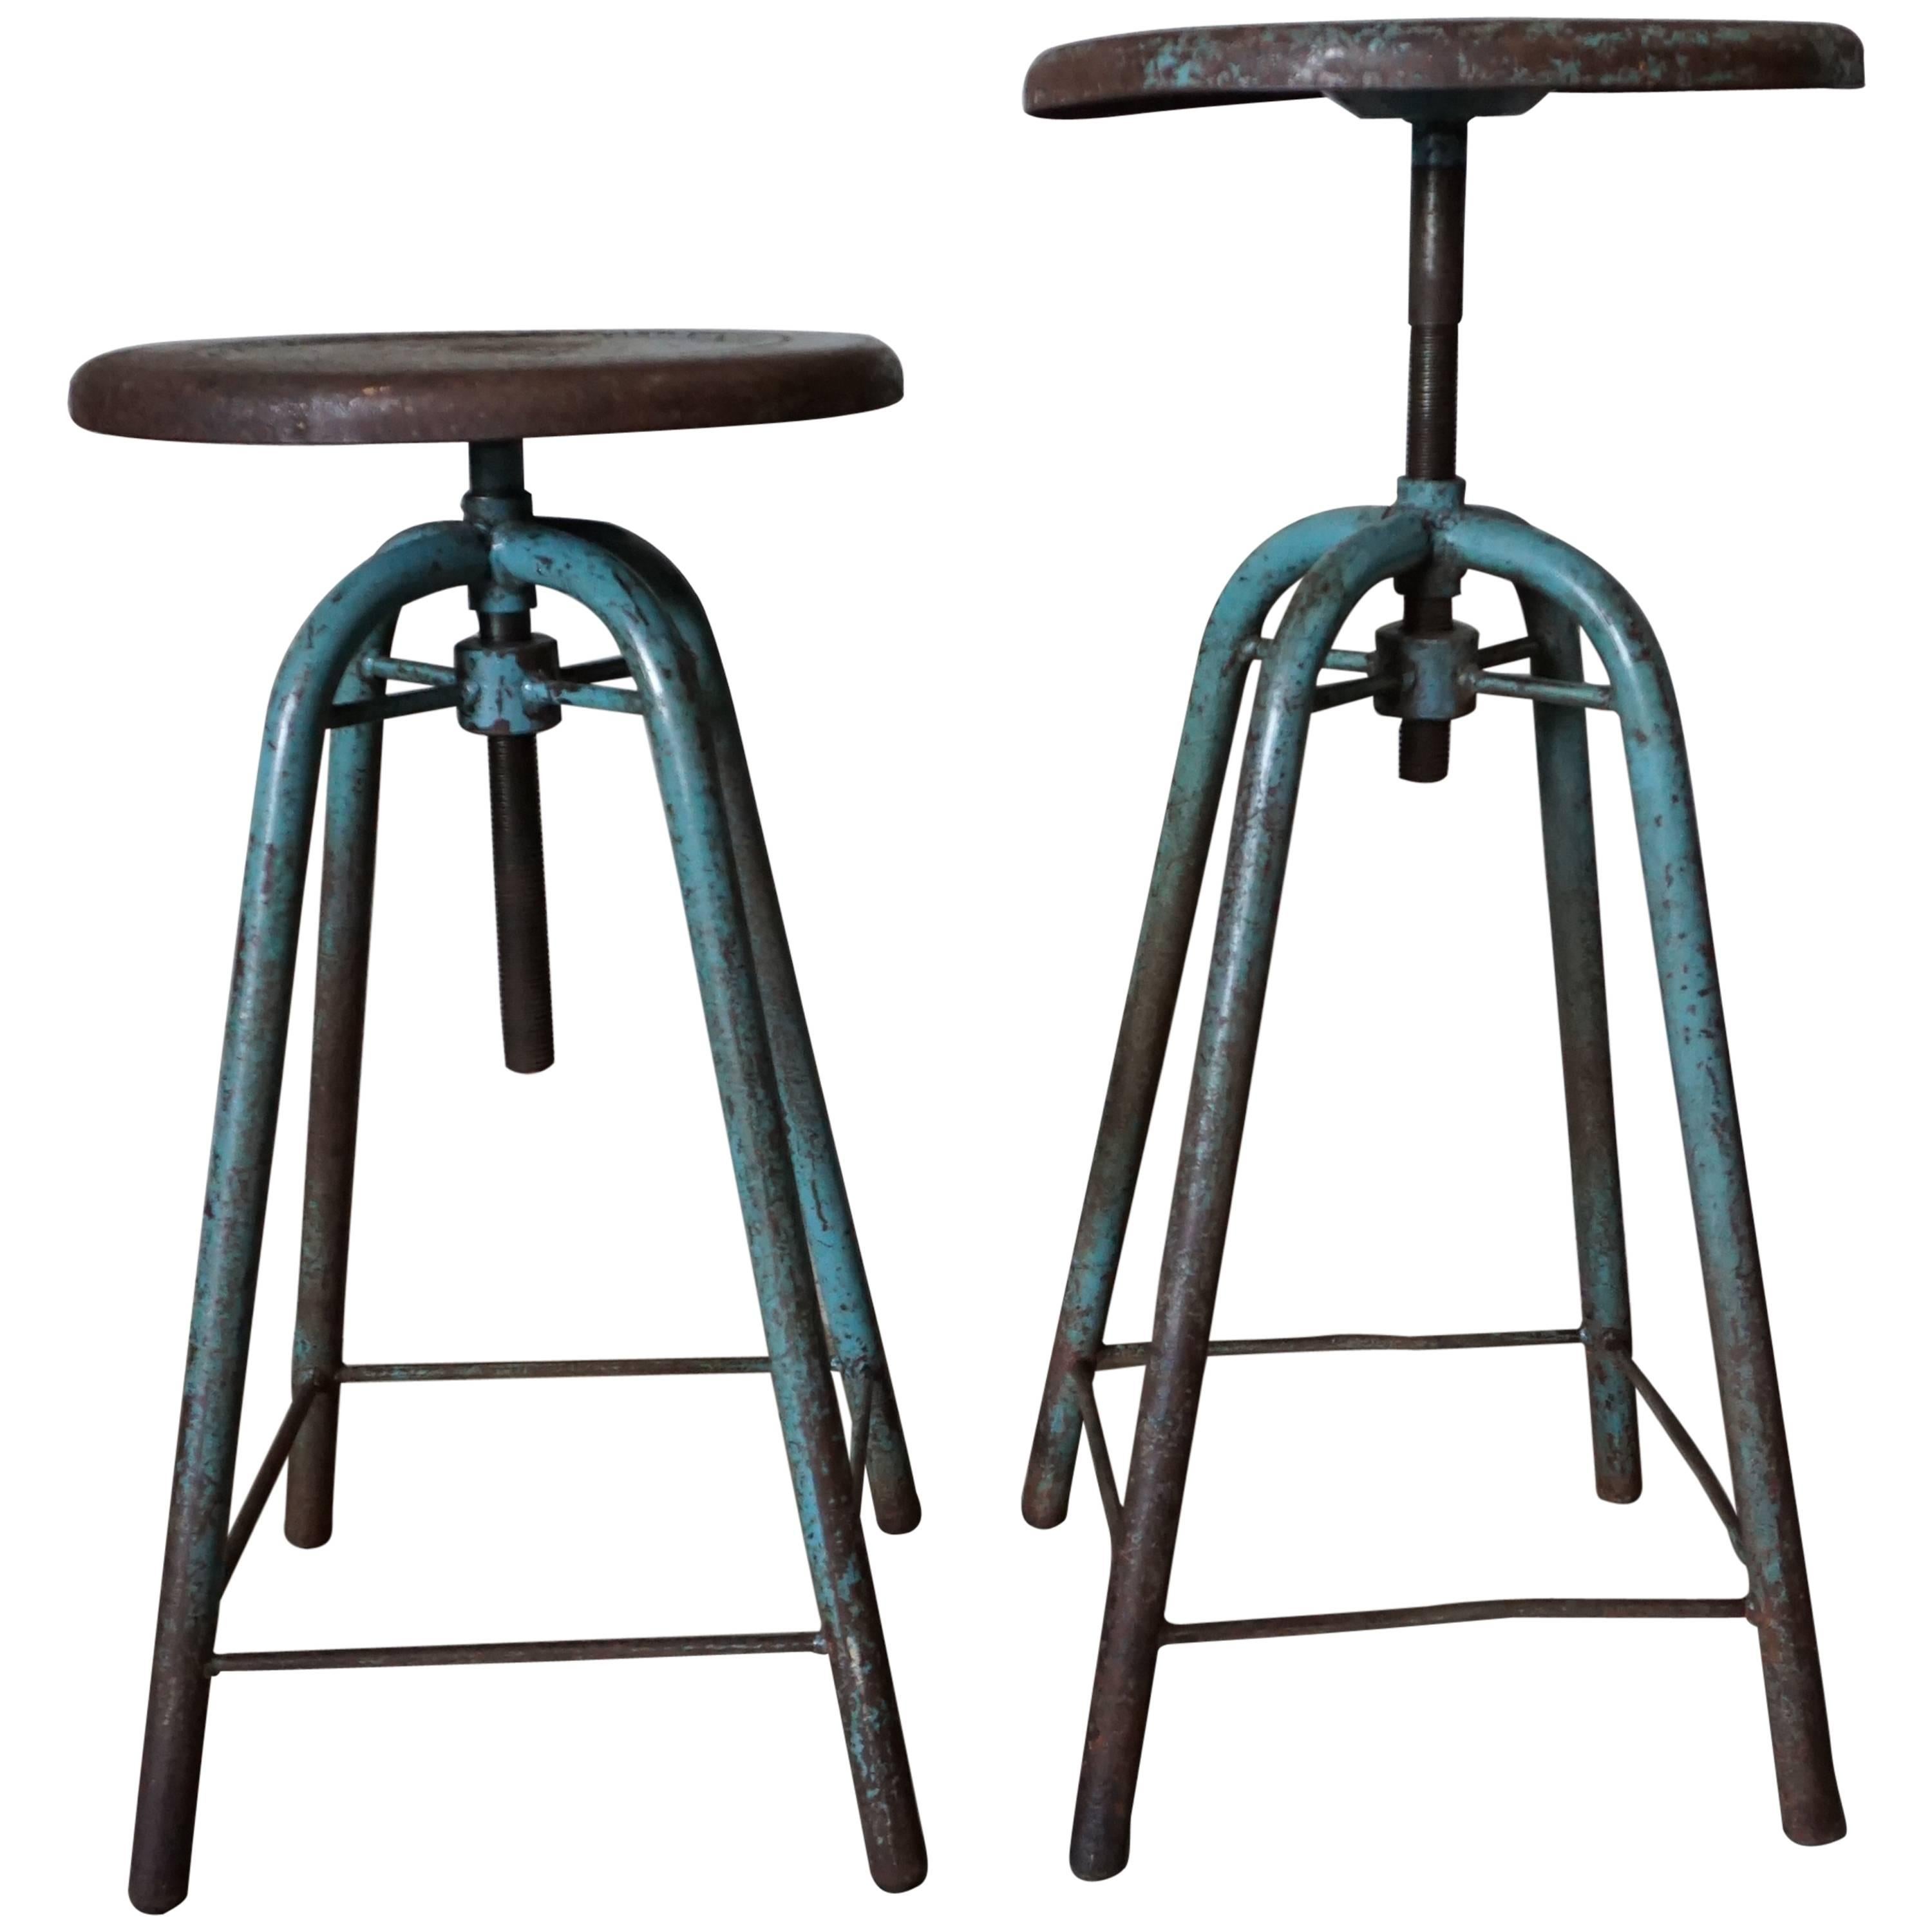 Pair of French Vintage Industrial Adjustable Stools